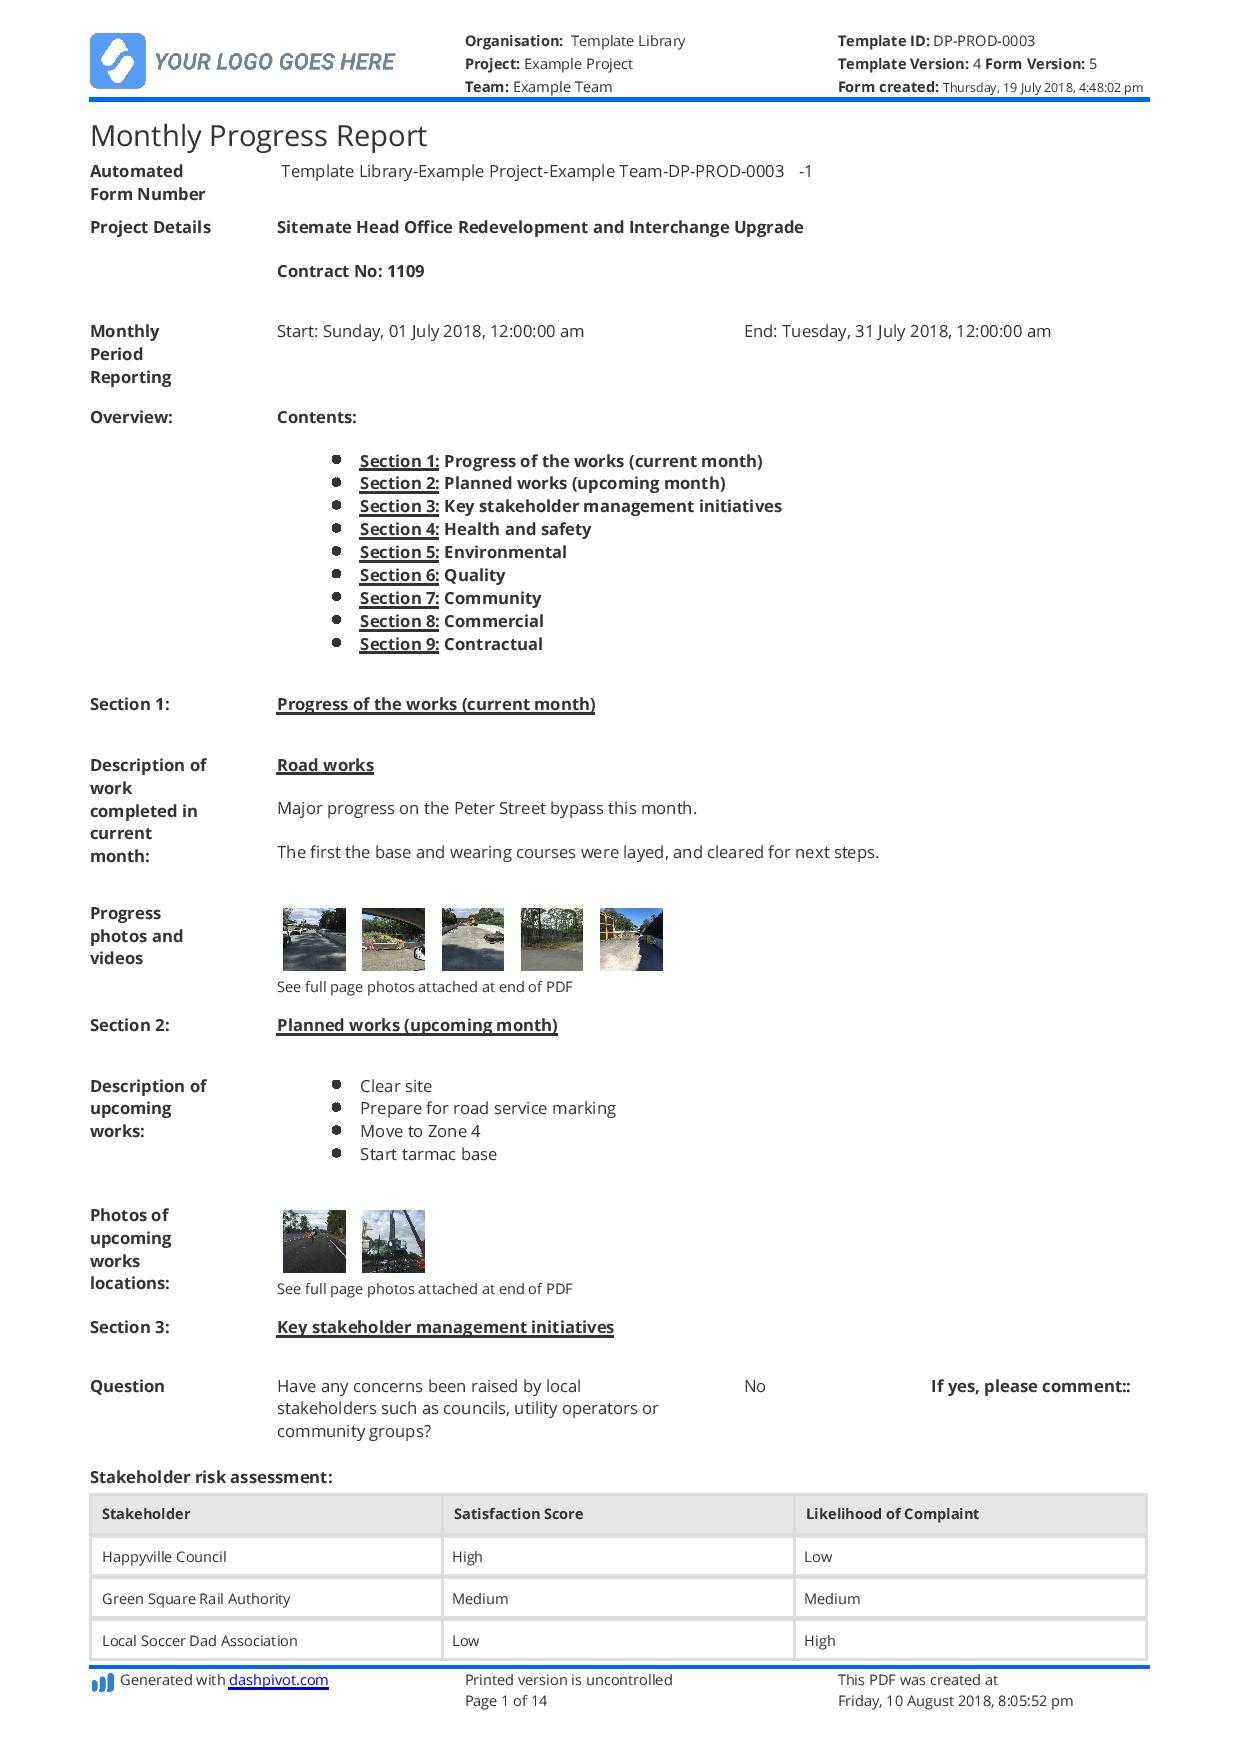 Monthly Construction Progress Report Template: Use This Pertaining To Monthly Progress Report Template